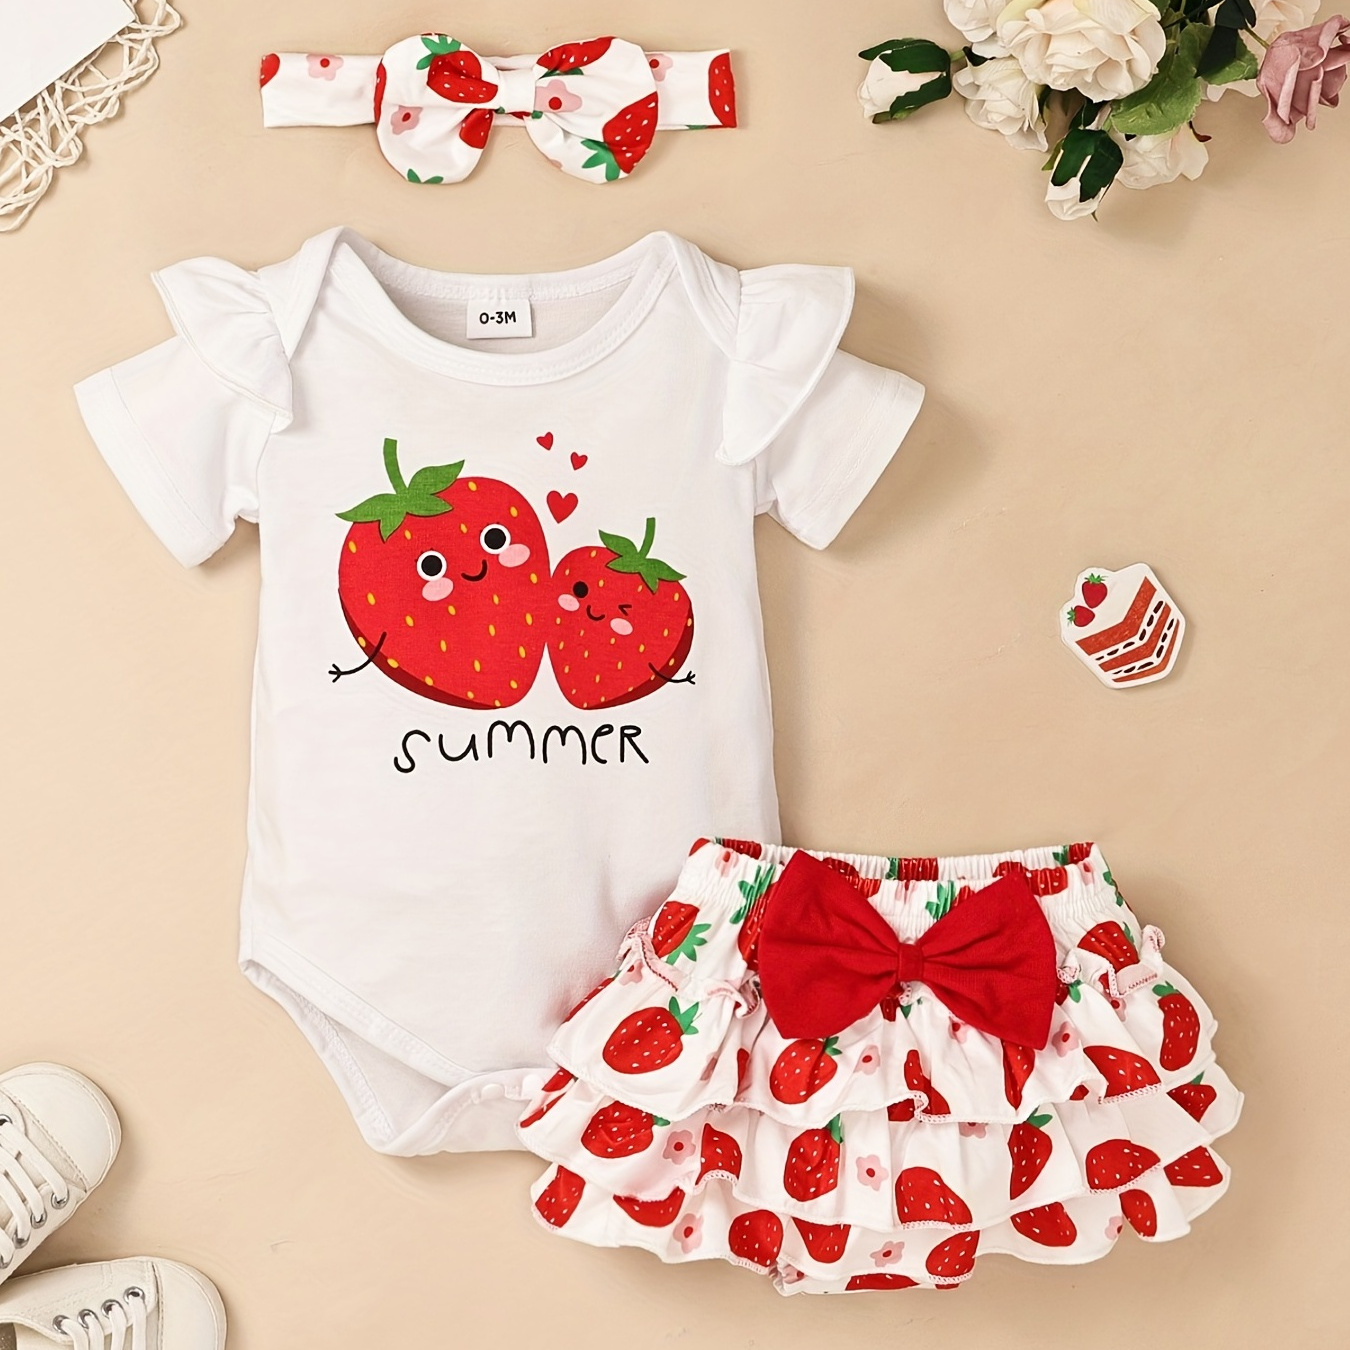 

2pcs Baby Girl Clothes Infant Cotton Outfits - Strawberry Graphic Cute Romper + Cute Bow Shorts + Headband - Newborn Summer Clothing Set